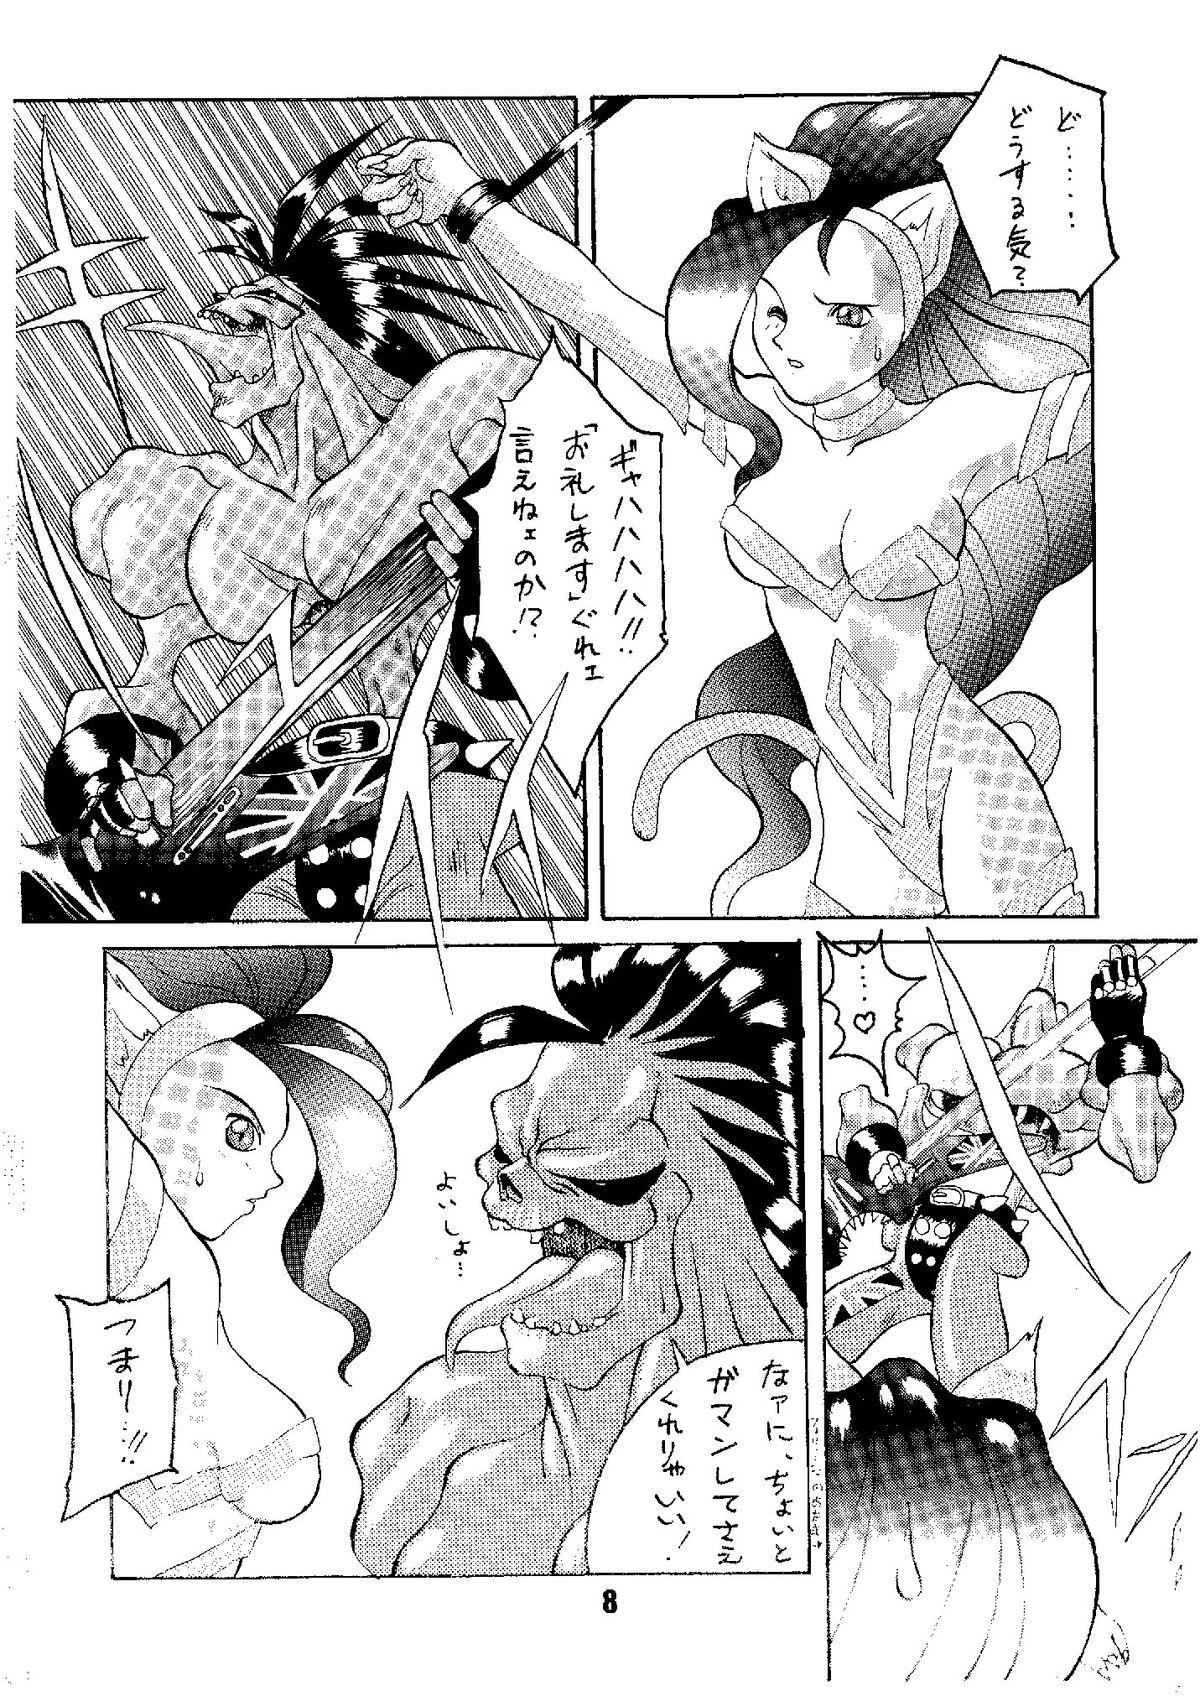 Spying Shine of Darkness - Darkstalkers Pick Up - Page 8